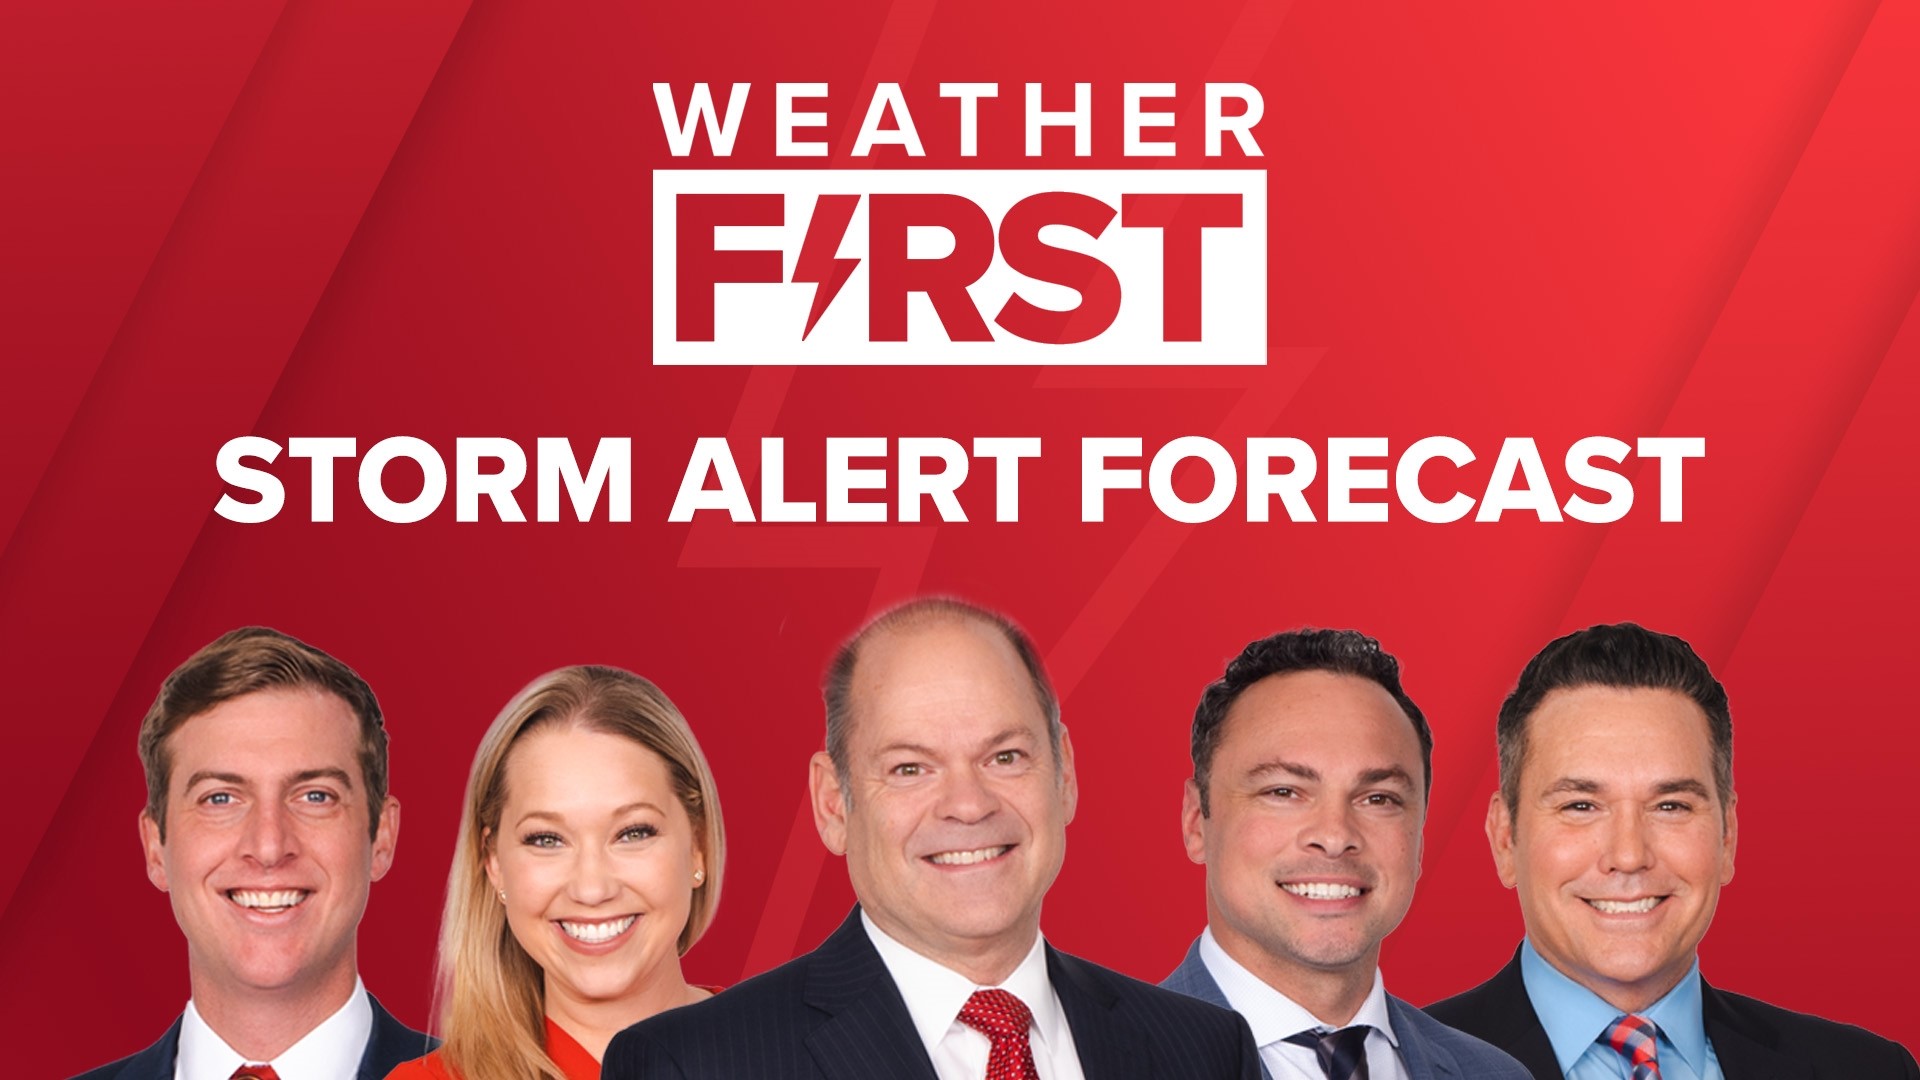 Tuesday afternoon is a Weather First Storm Alert Da. There will be scattered, strong to severe thunderstorms that are expected to impact portions of the area.